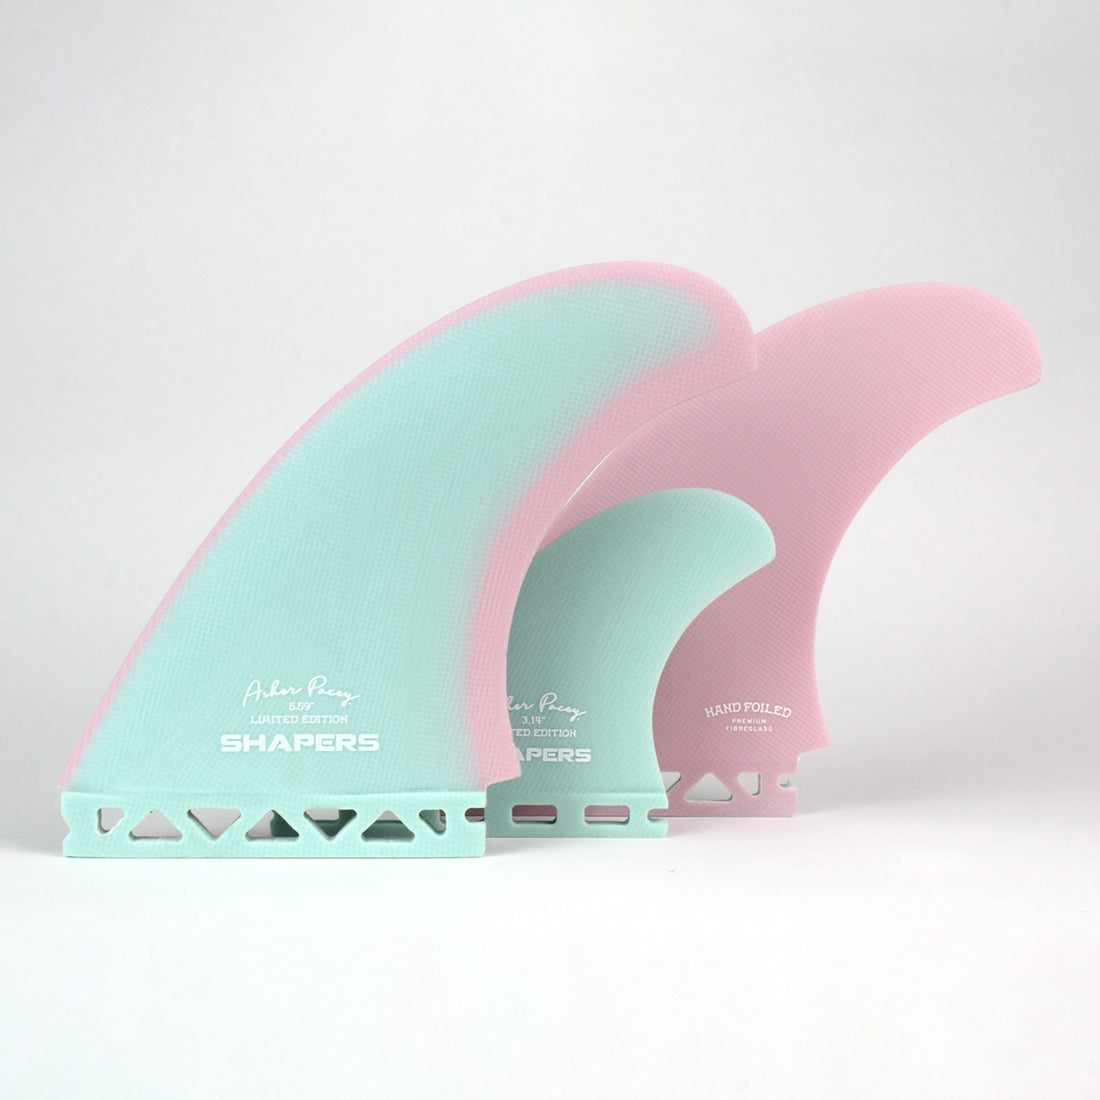 Shapers Fins - AP 5.79" (Futures) Asher Pacey Twin Fins + Trailer - Candy